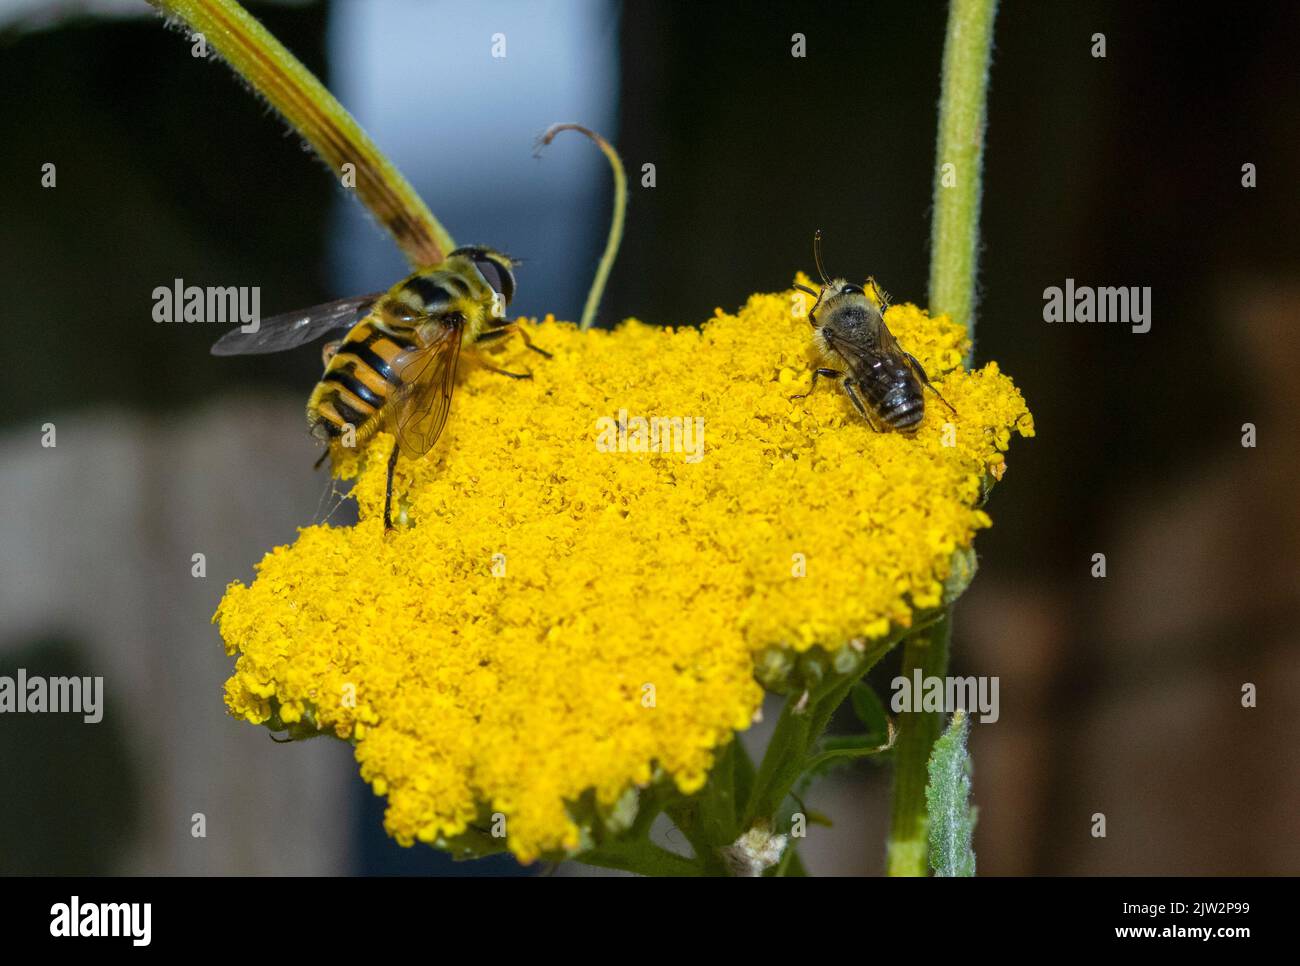 Myathropa florea hoverfly and Colletes species bee on Achillea flower head Stock Photo